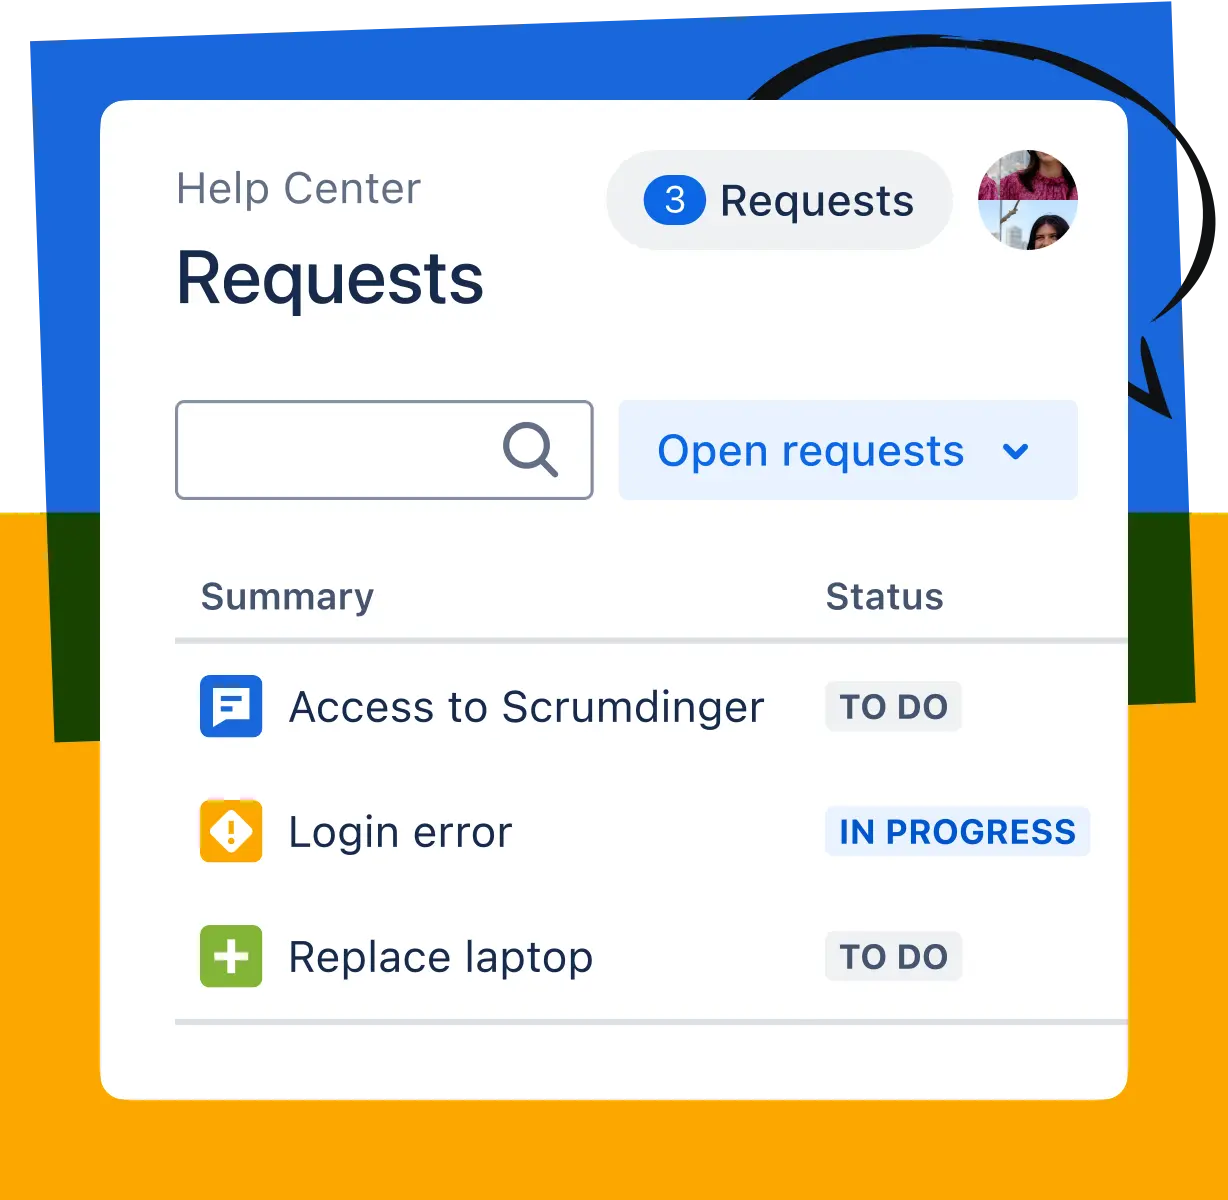 A list of 4 service requests with fields for summary, status, requestor, channel and response. There is a search bar above the list of requests.